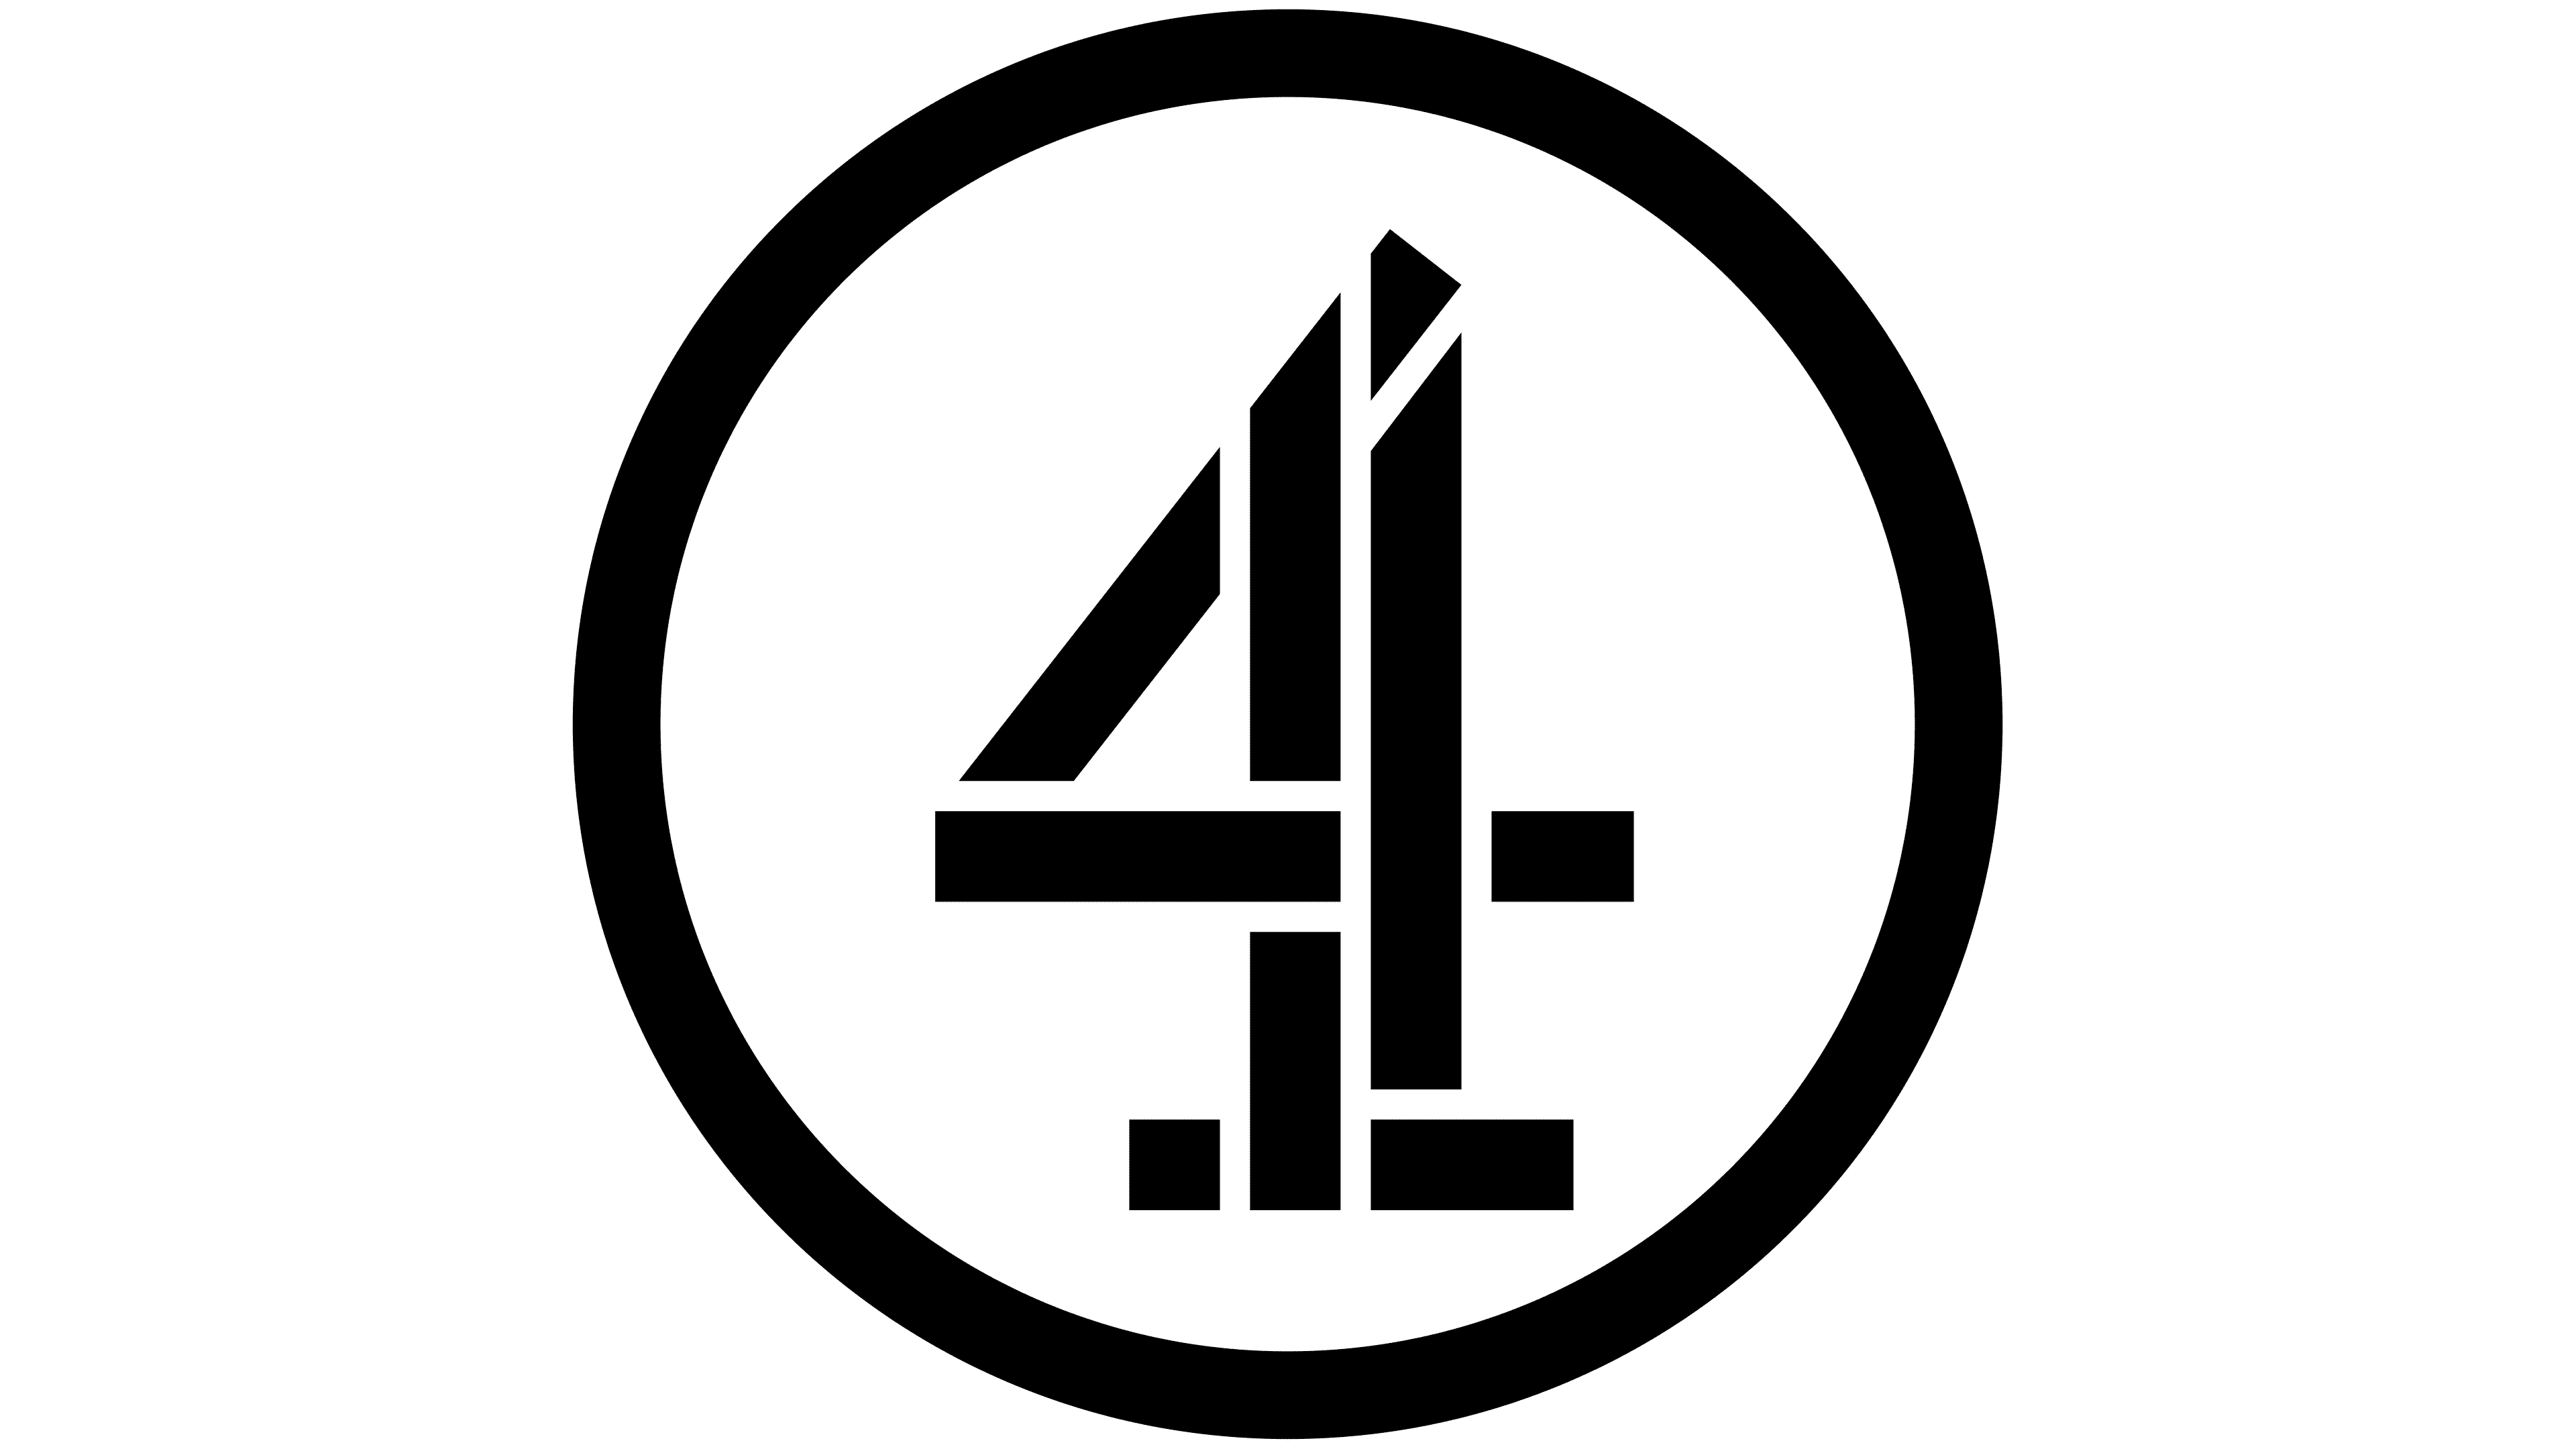 Channel 4 Logo - Management And Leadership